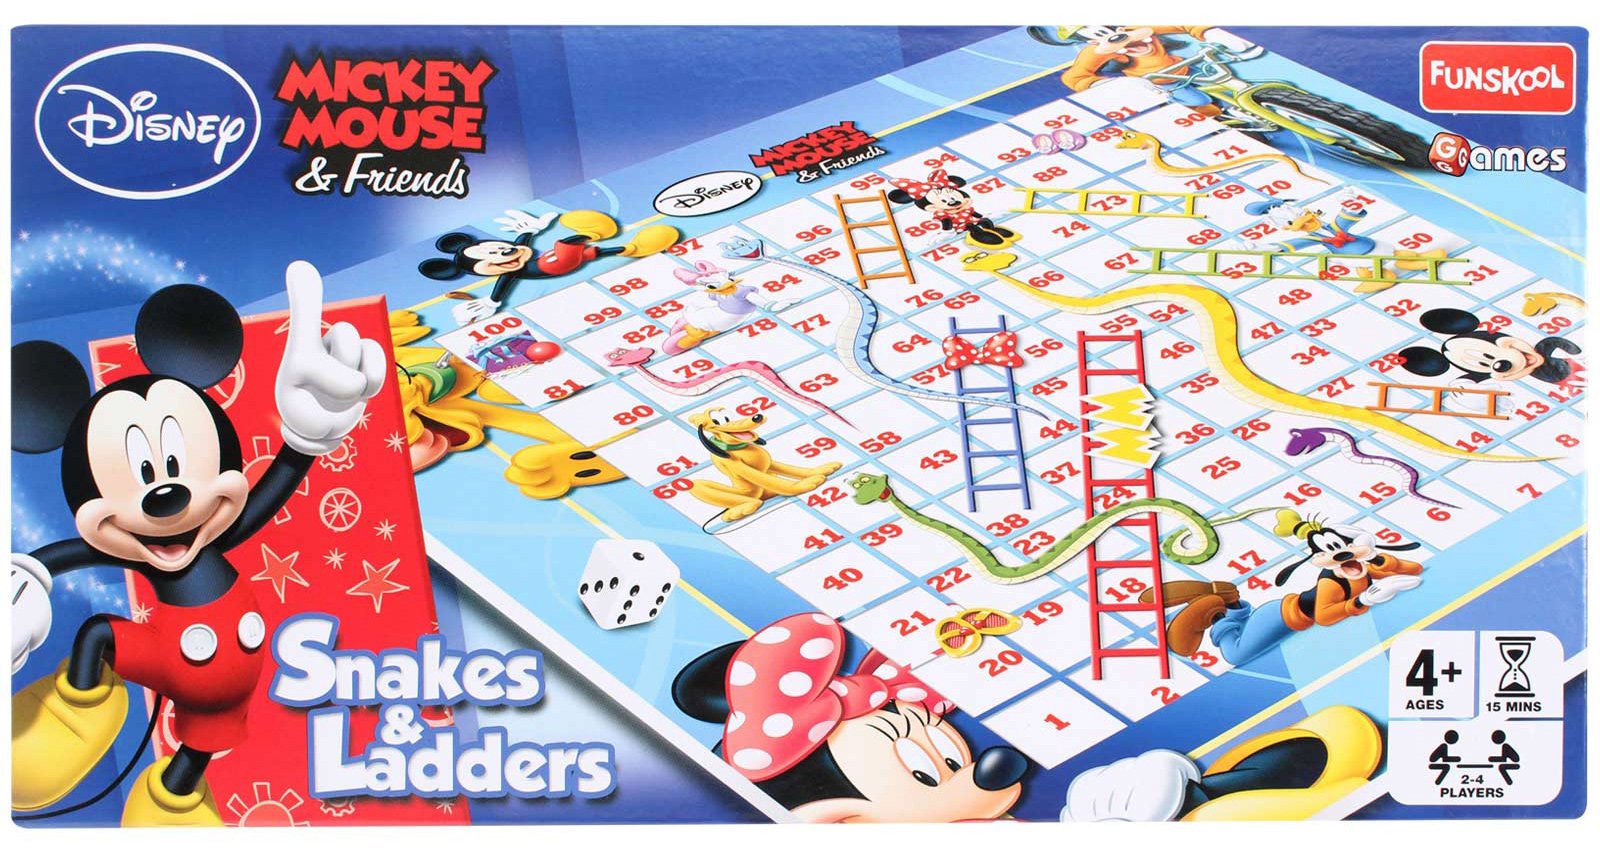 Disney Mickey Mouse & Friends Snakes & Ladders